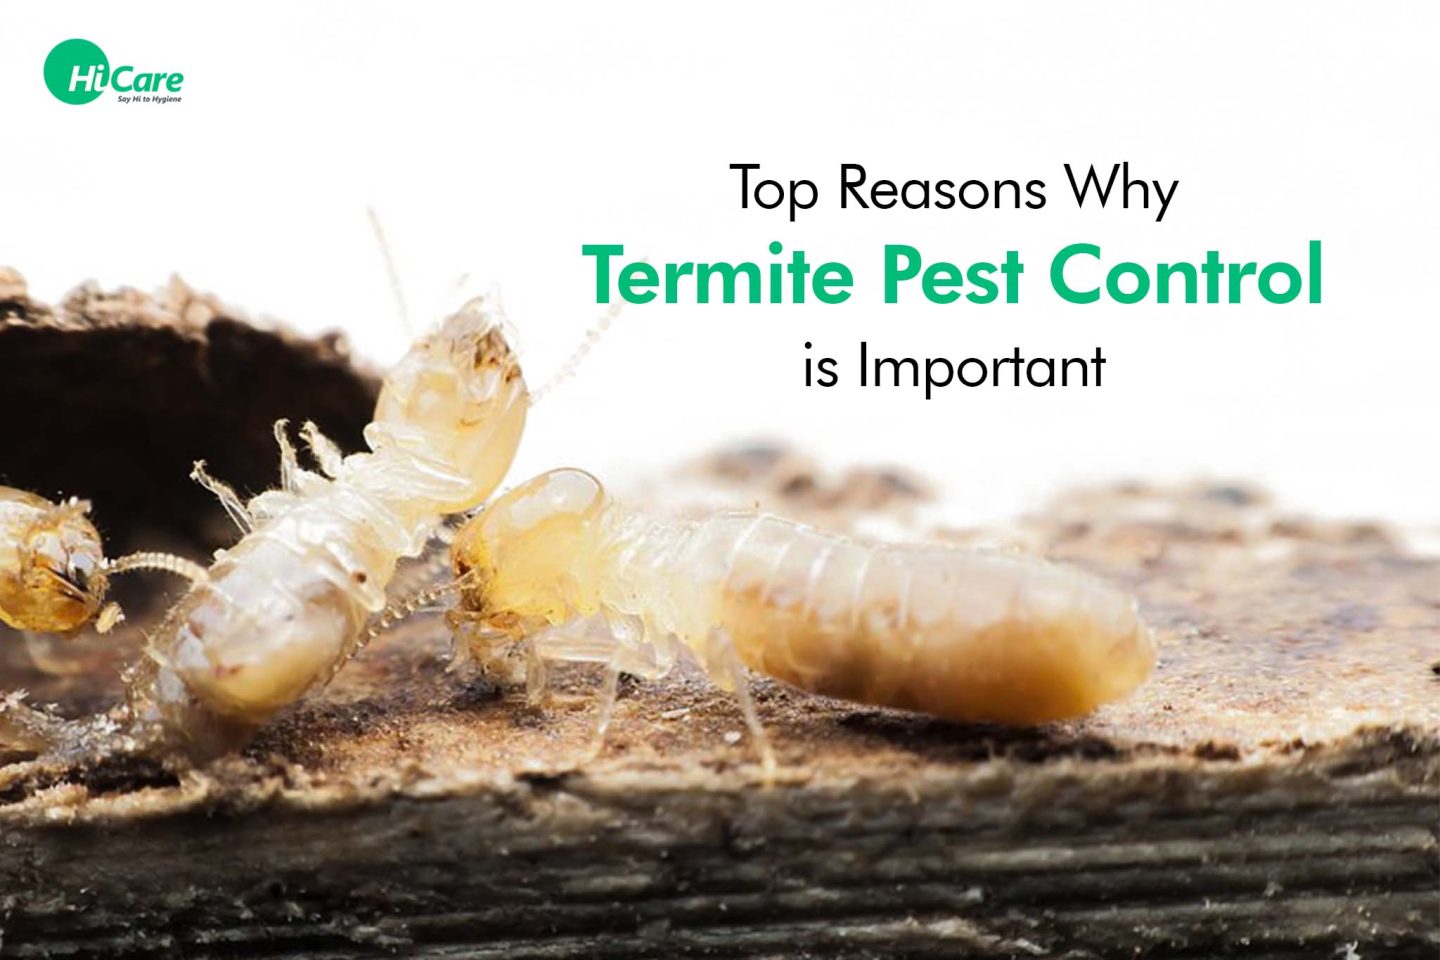 Looking for a Pest Control Expert to Answer Questions About Termites